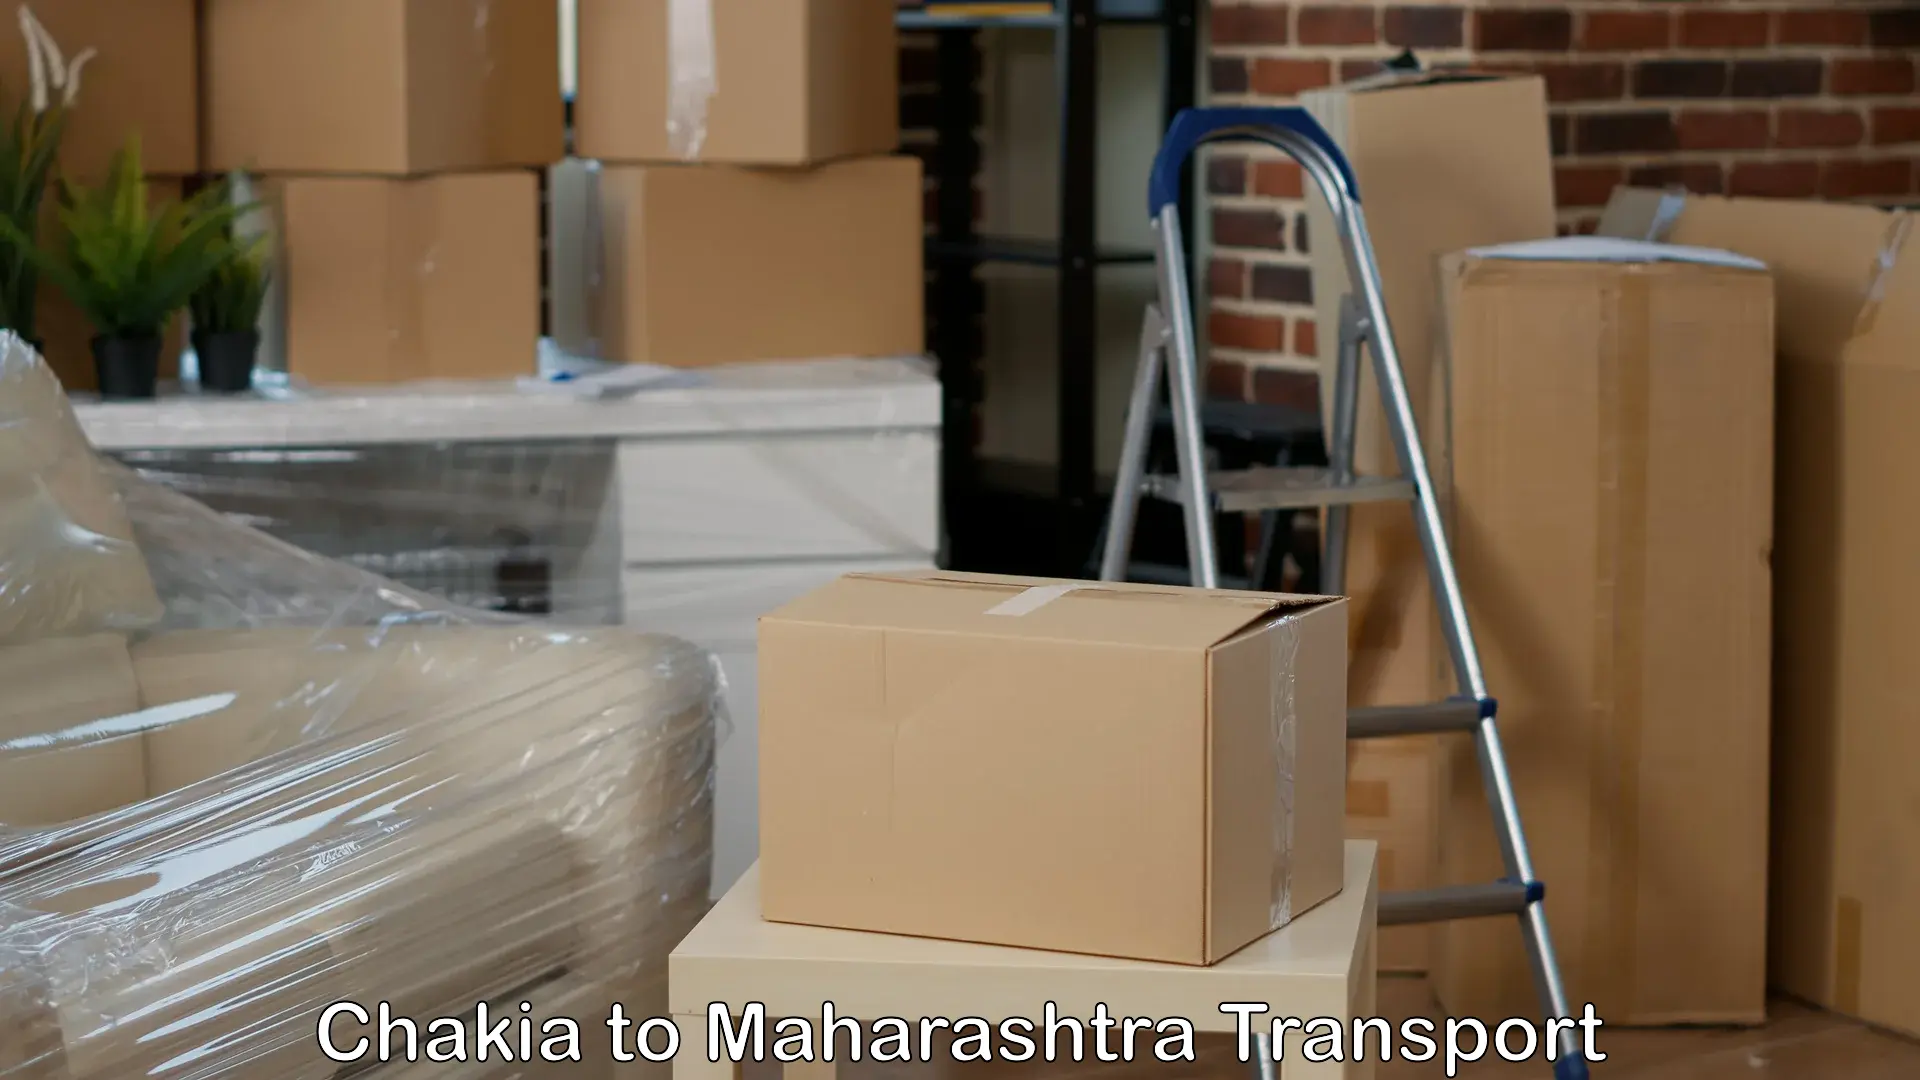 Truck transport companies in India in Chakia to Hingoli